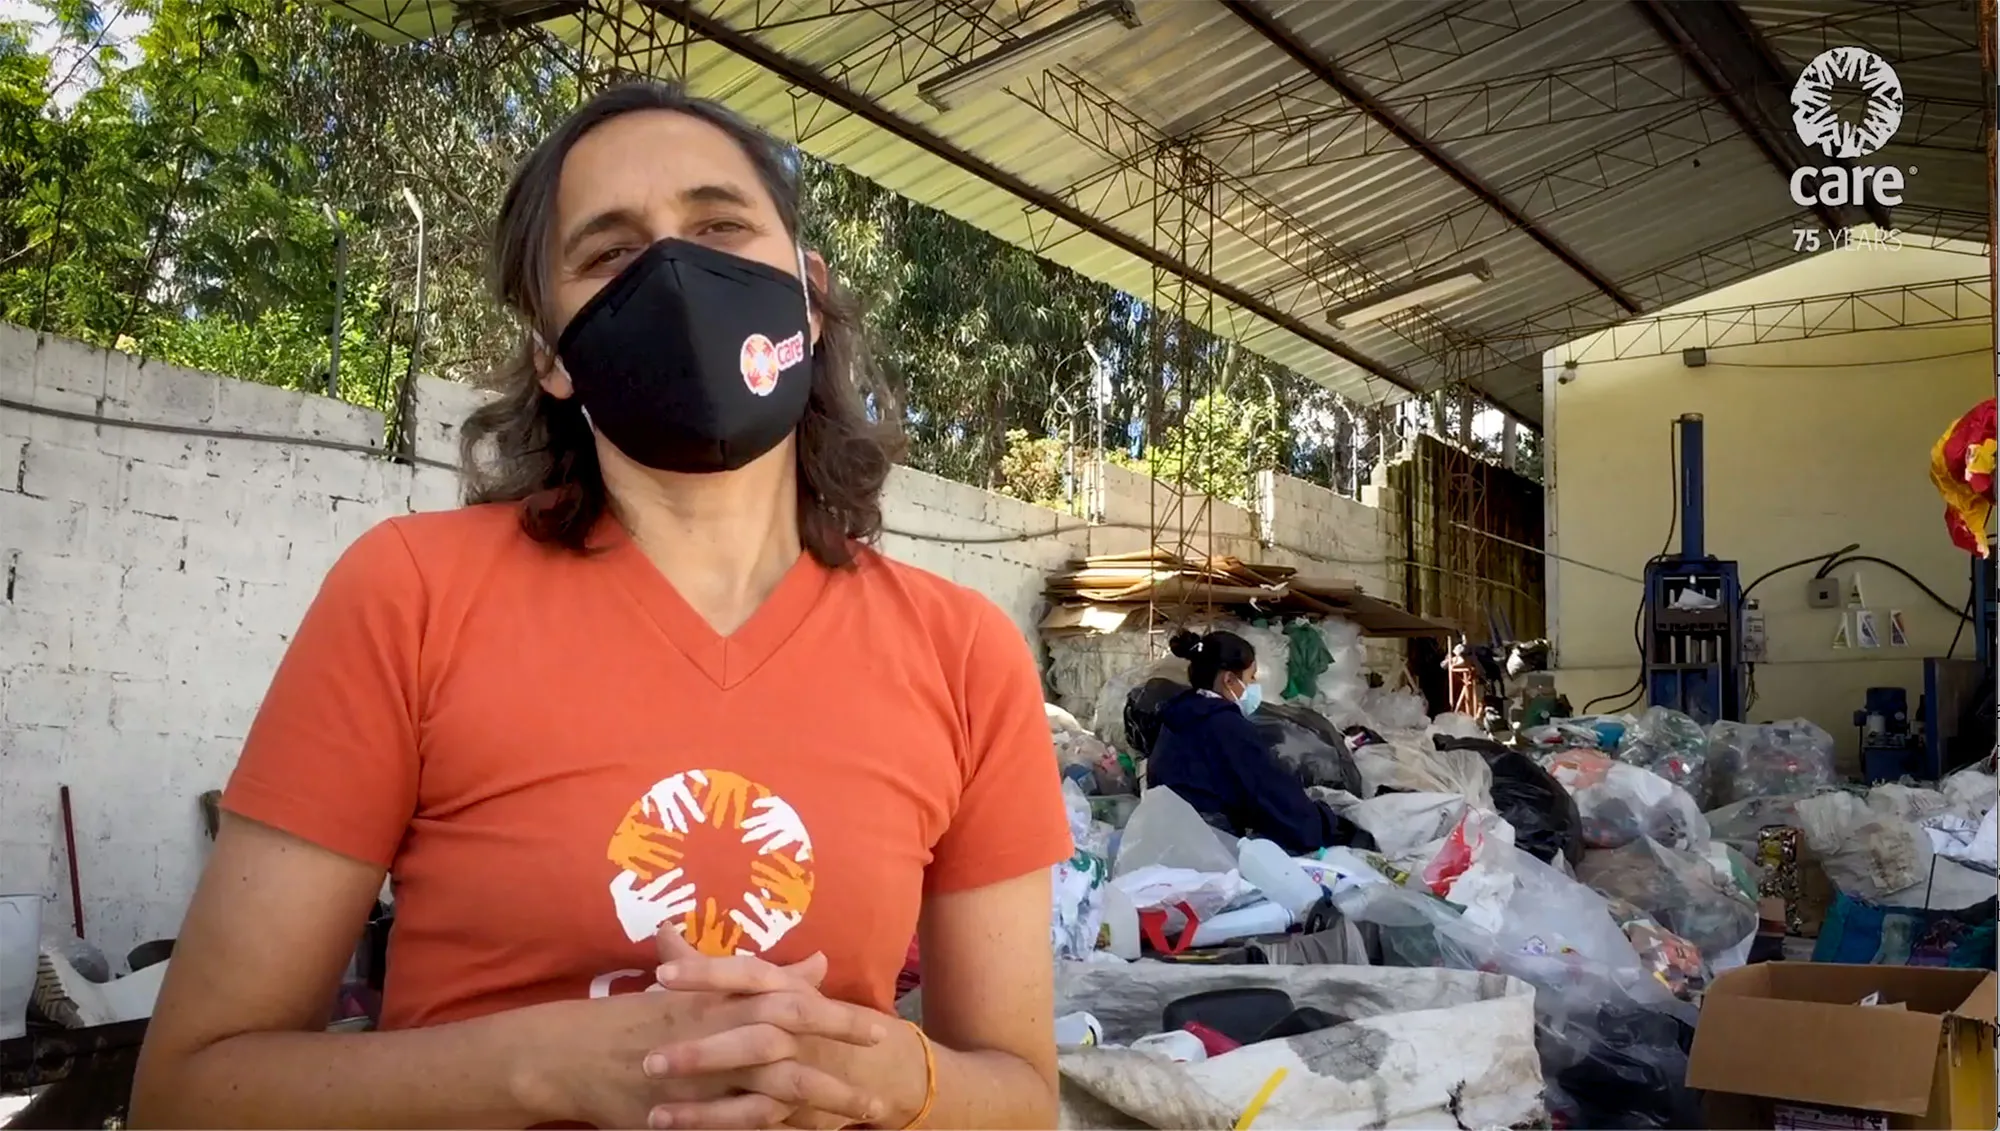 a woman in a face mask stands in front of a recycling processing plant while people in masks work behind her.